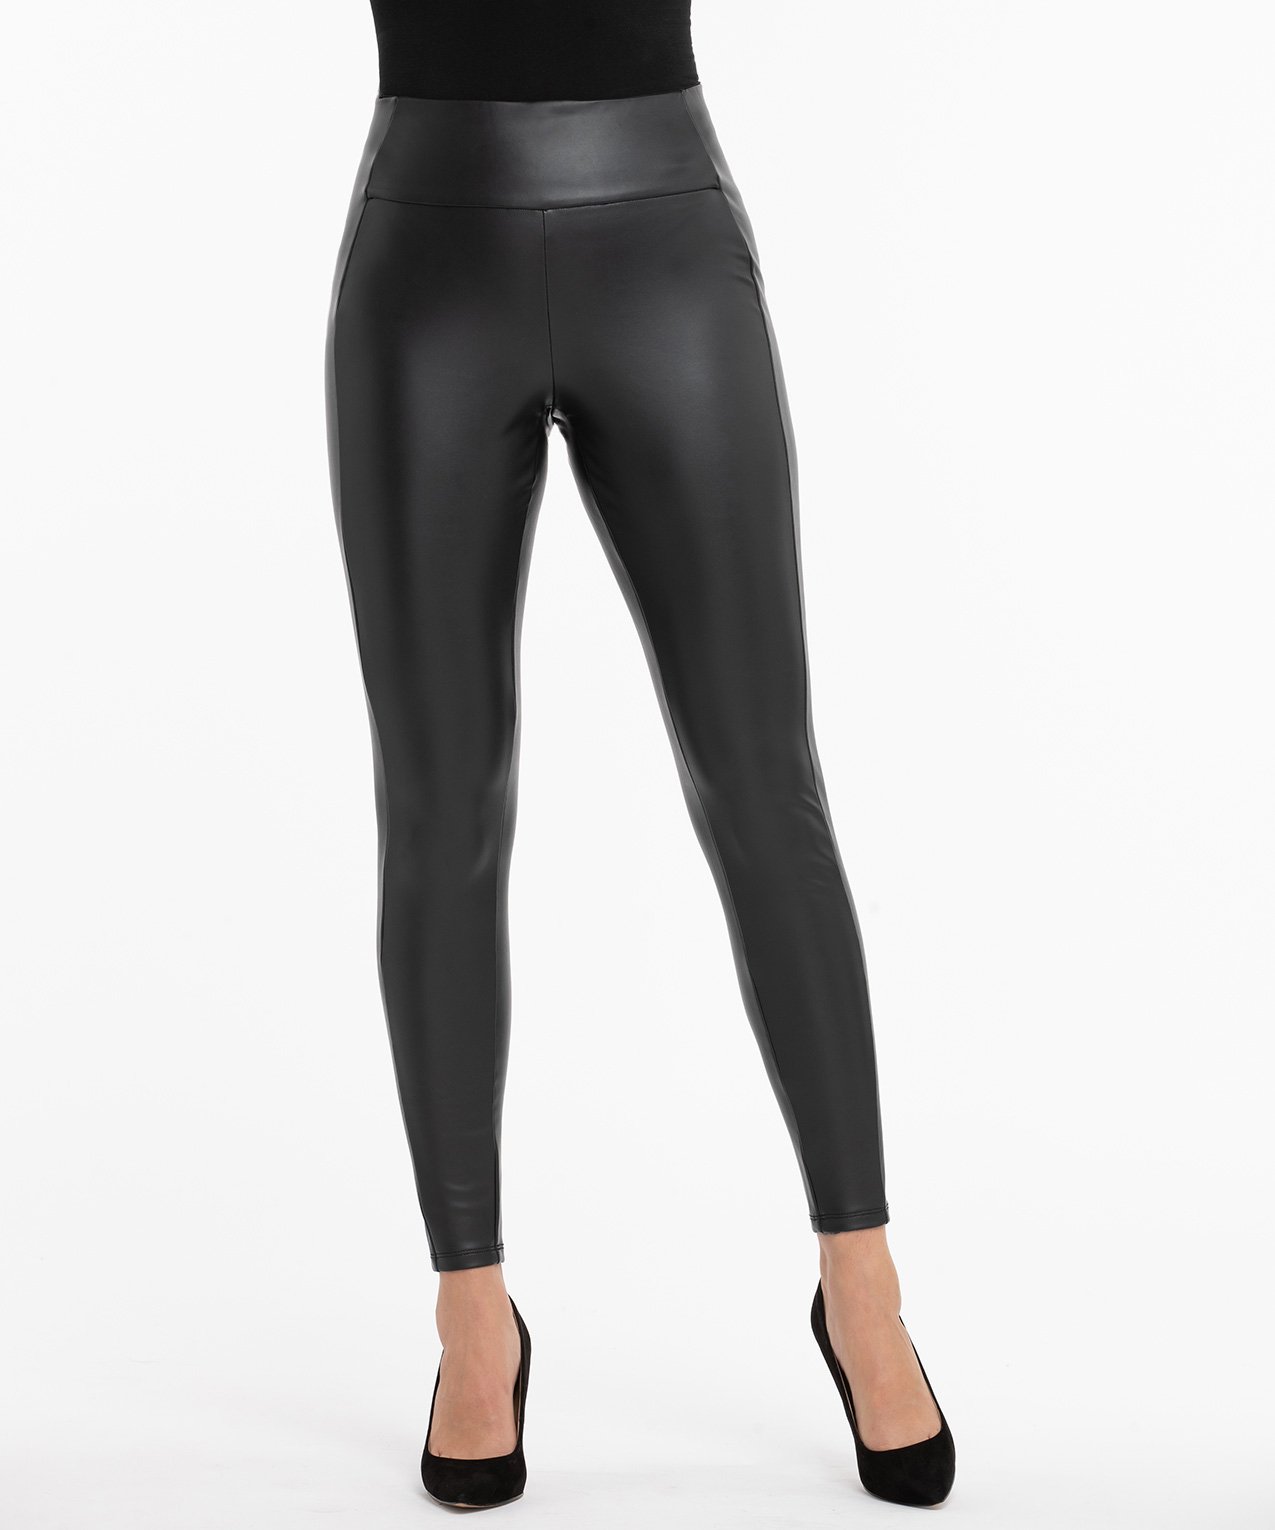 NWT Missguided- Faux Leather Pintuck Leggings size: US 8